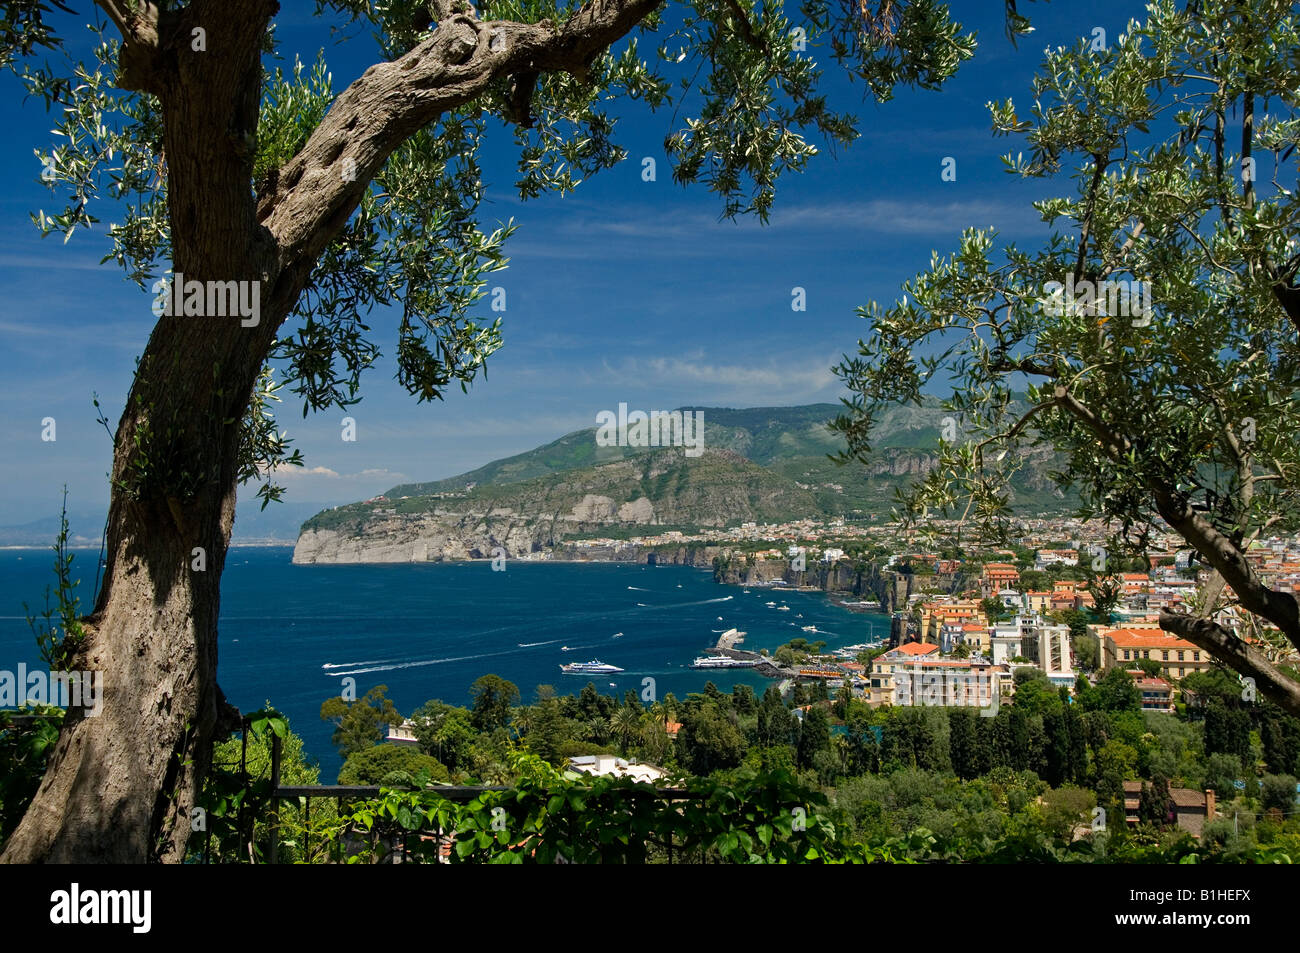 A view of the bay of Naples and Sorrento Italy from an olive grove in the gardens of a hotel Stock Photo